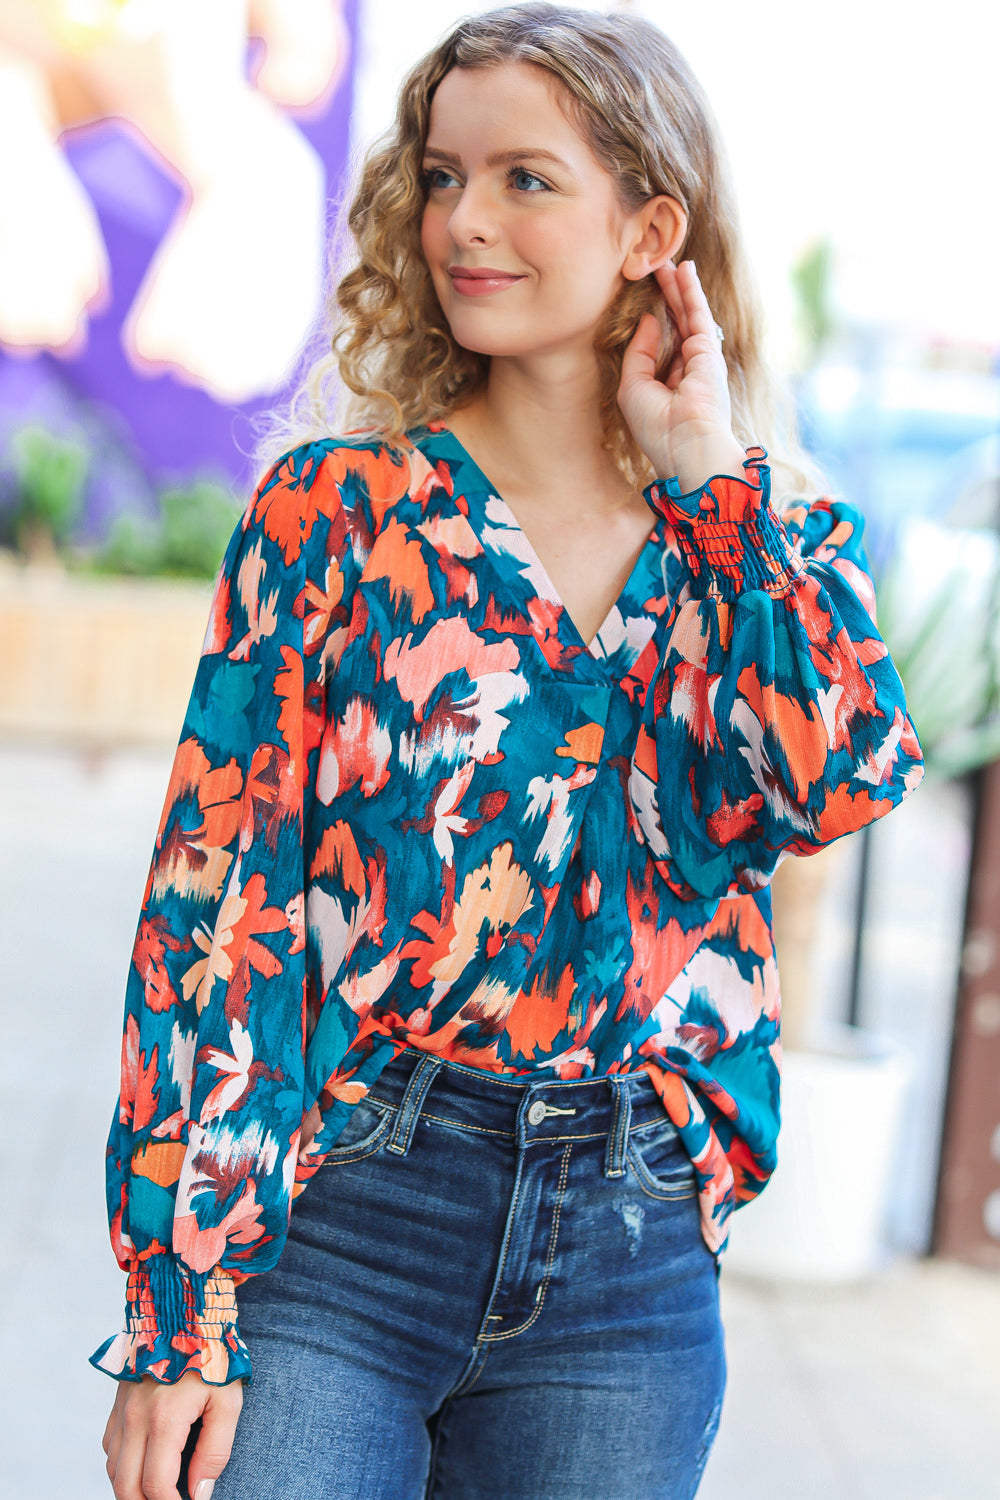 All I Ask Teal Floral Abstract Print V Neck Smocked Top Haptics